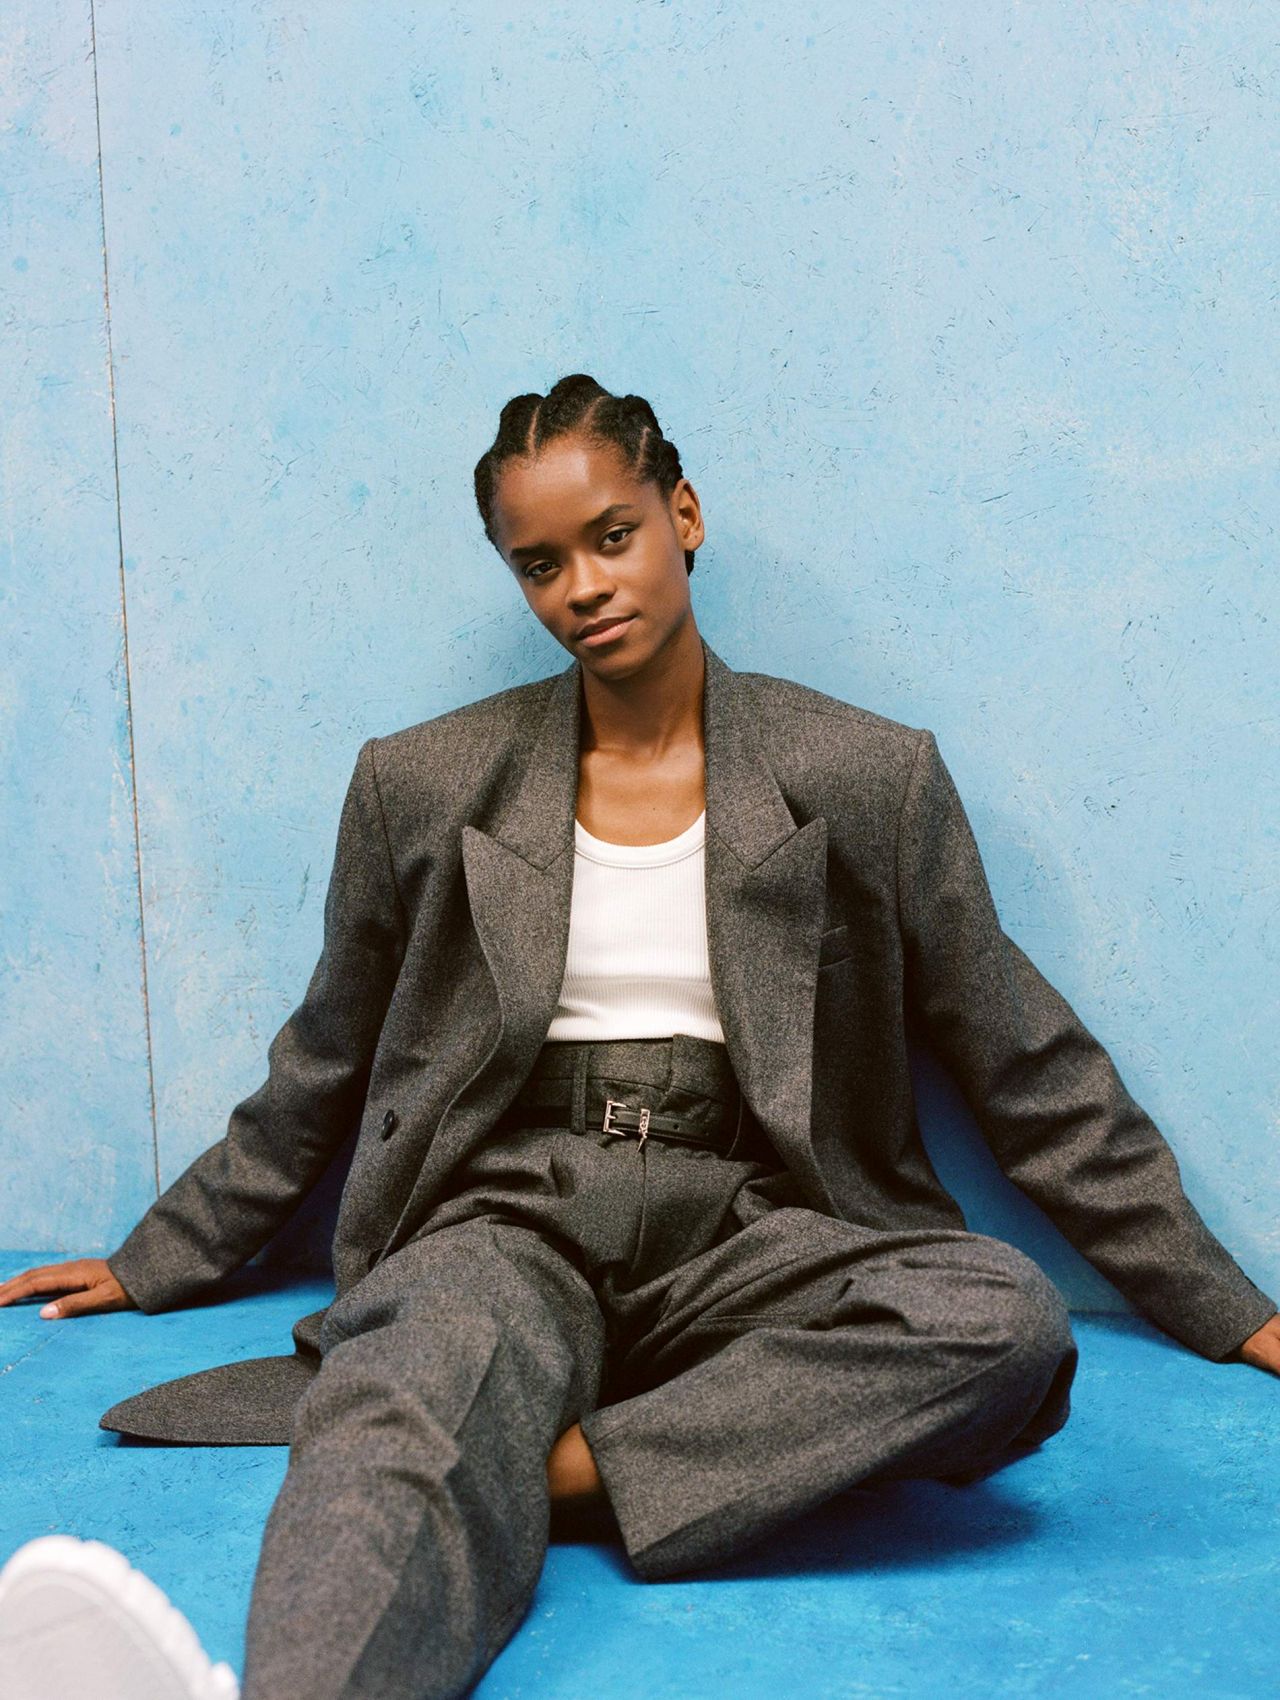 letitia-wright-the-edit-by-net-a-porter-october-2020-4.jpg